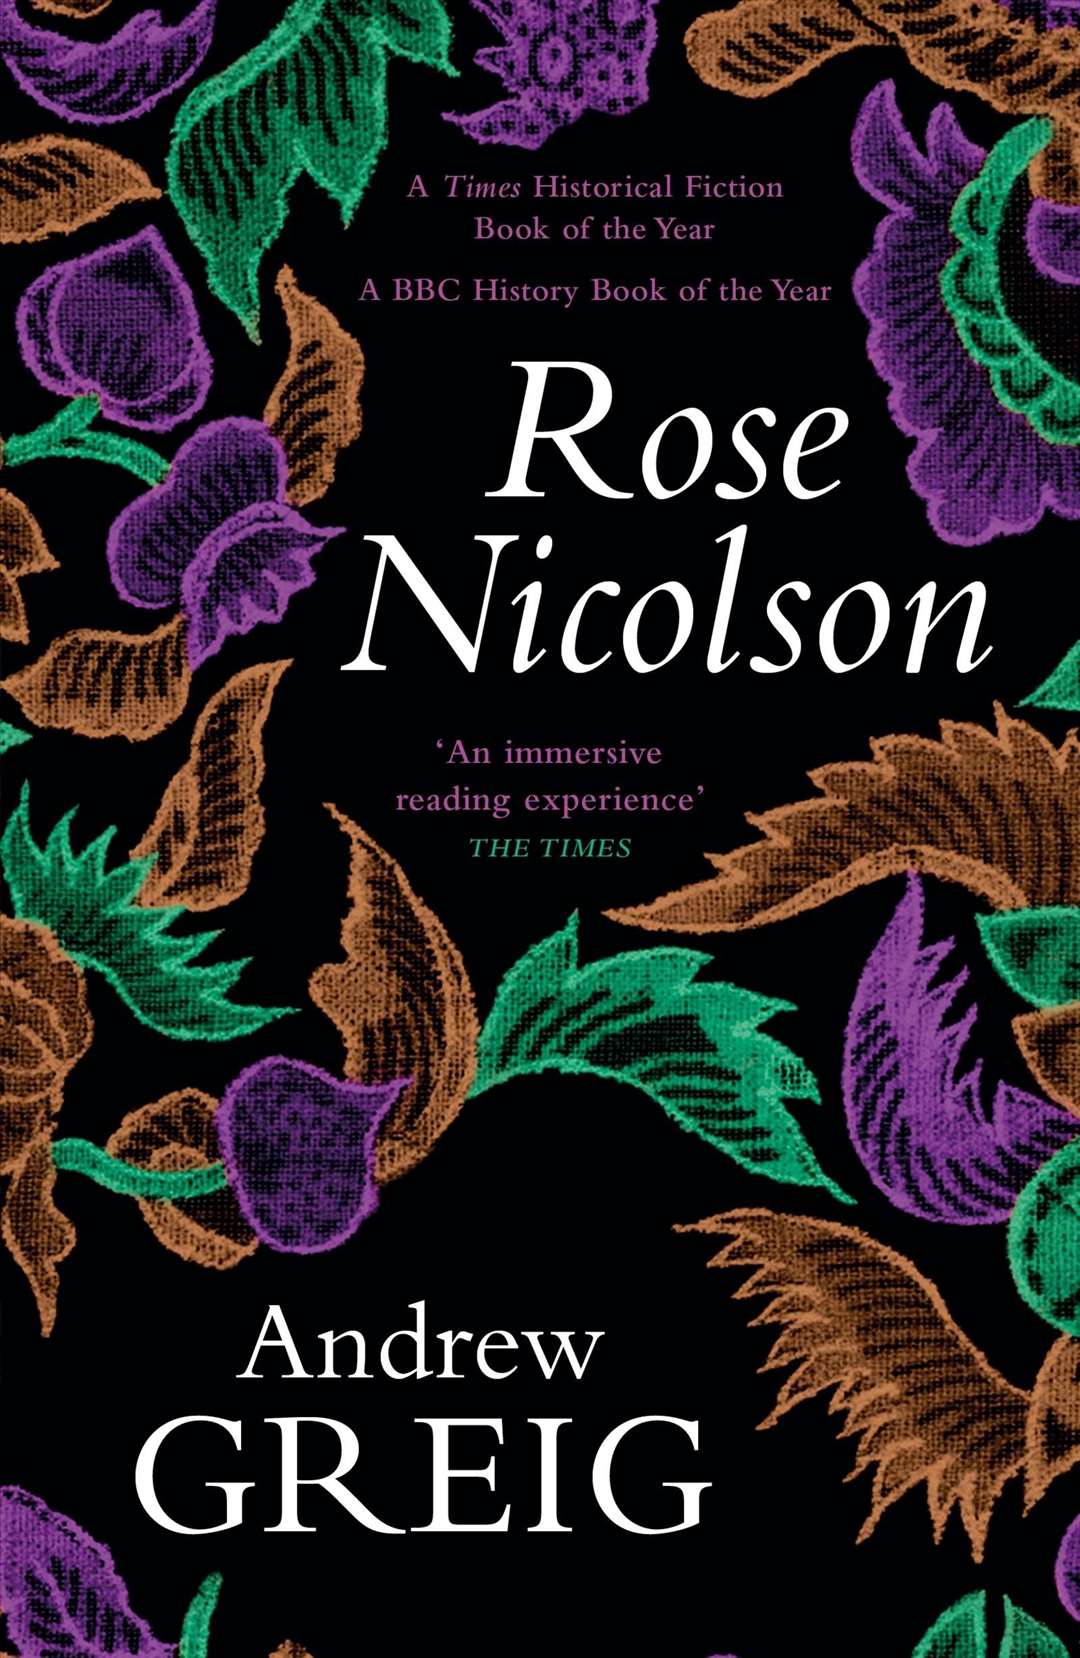 Rose Nicolson, Andrew Greig's latest novel which he will talk about at the Nairn Book & Arts Festival.